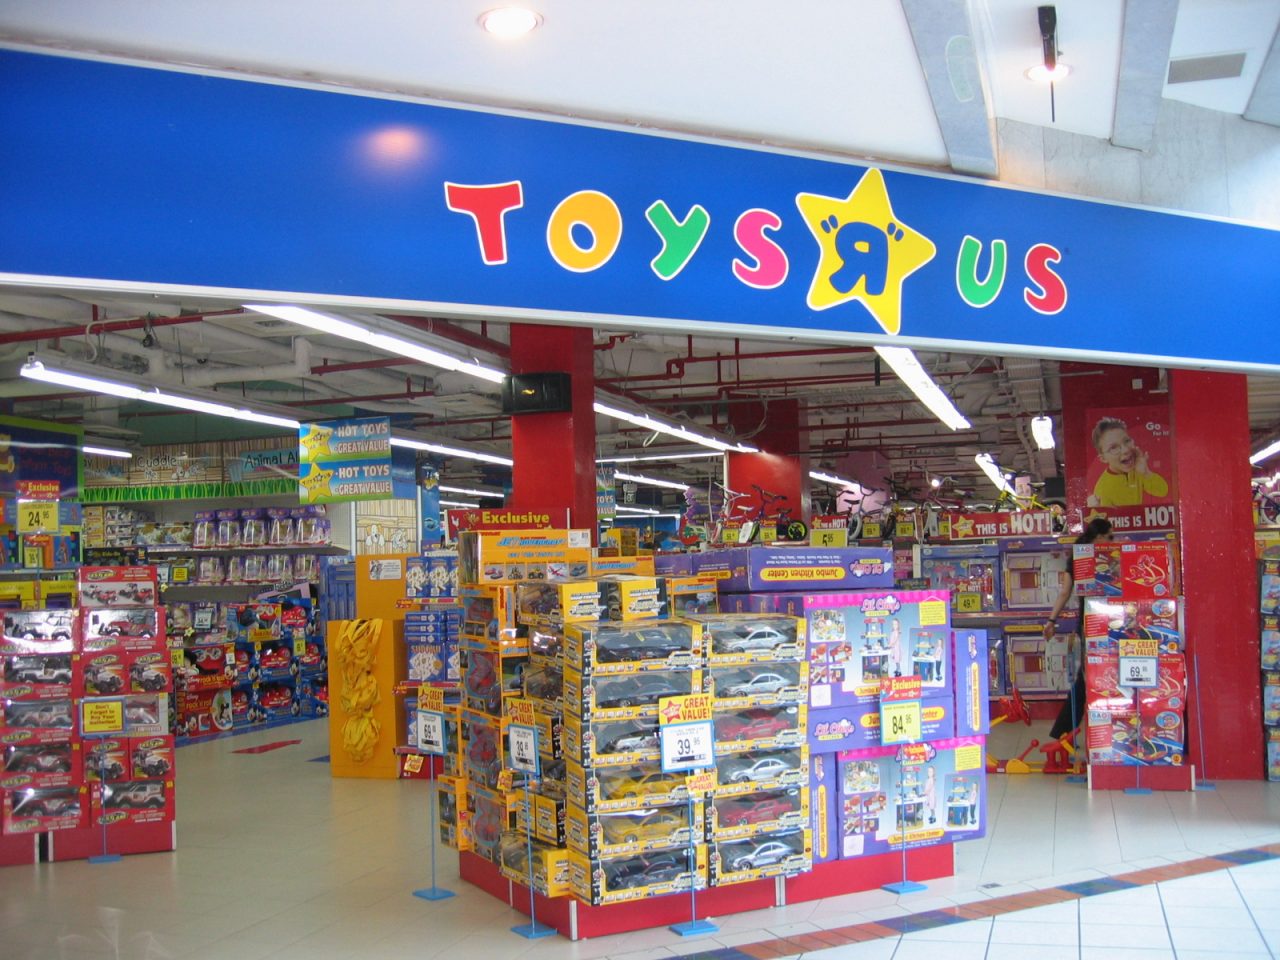 Toys R Us is closing down because kids don't go to shops anymore